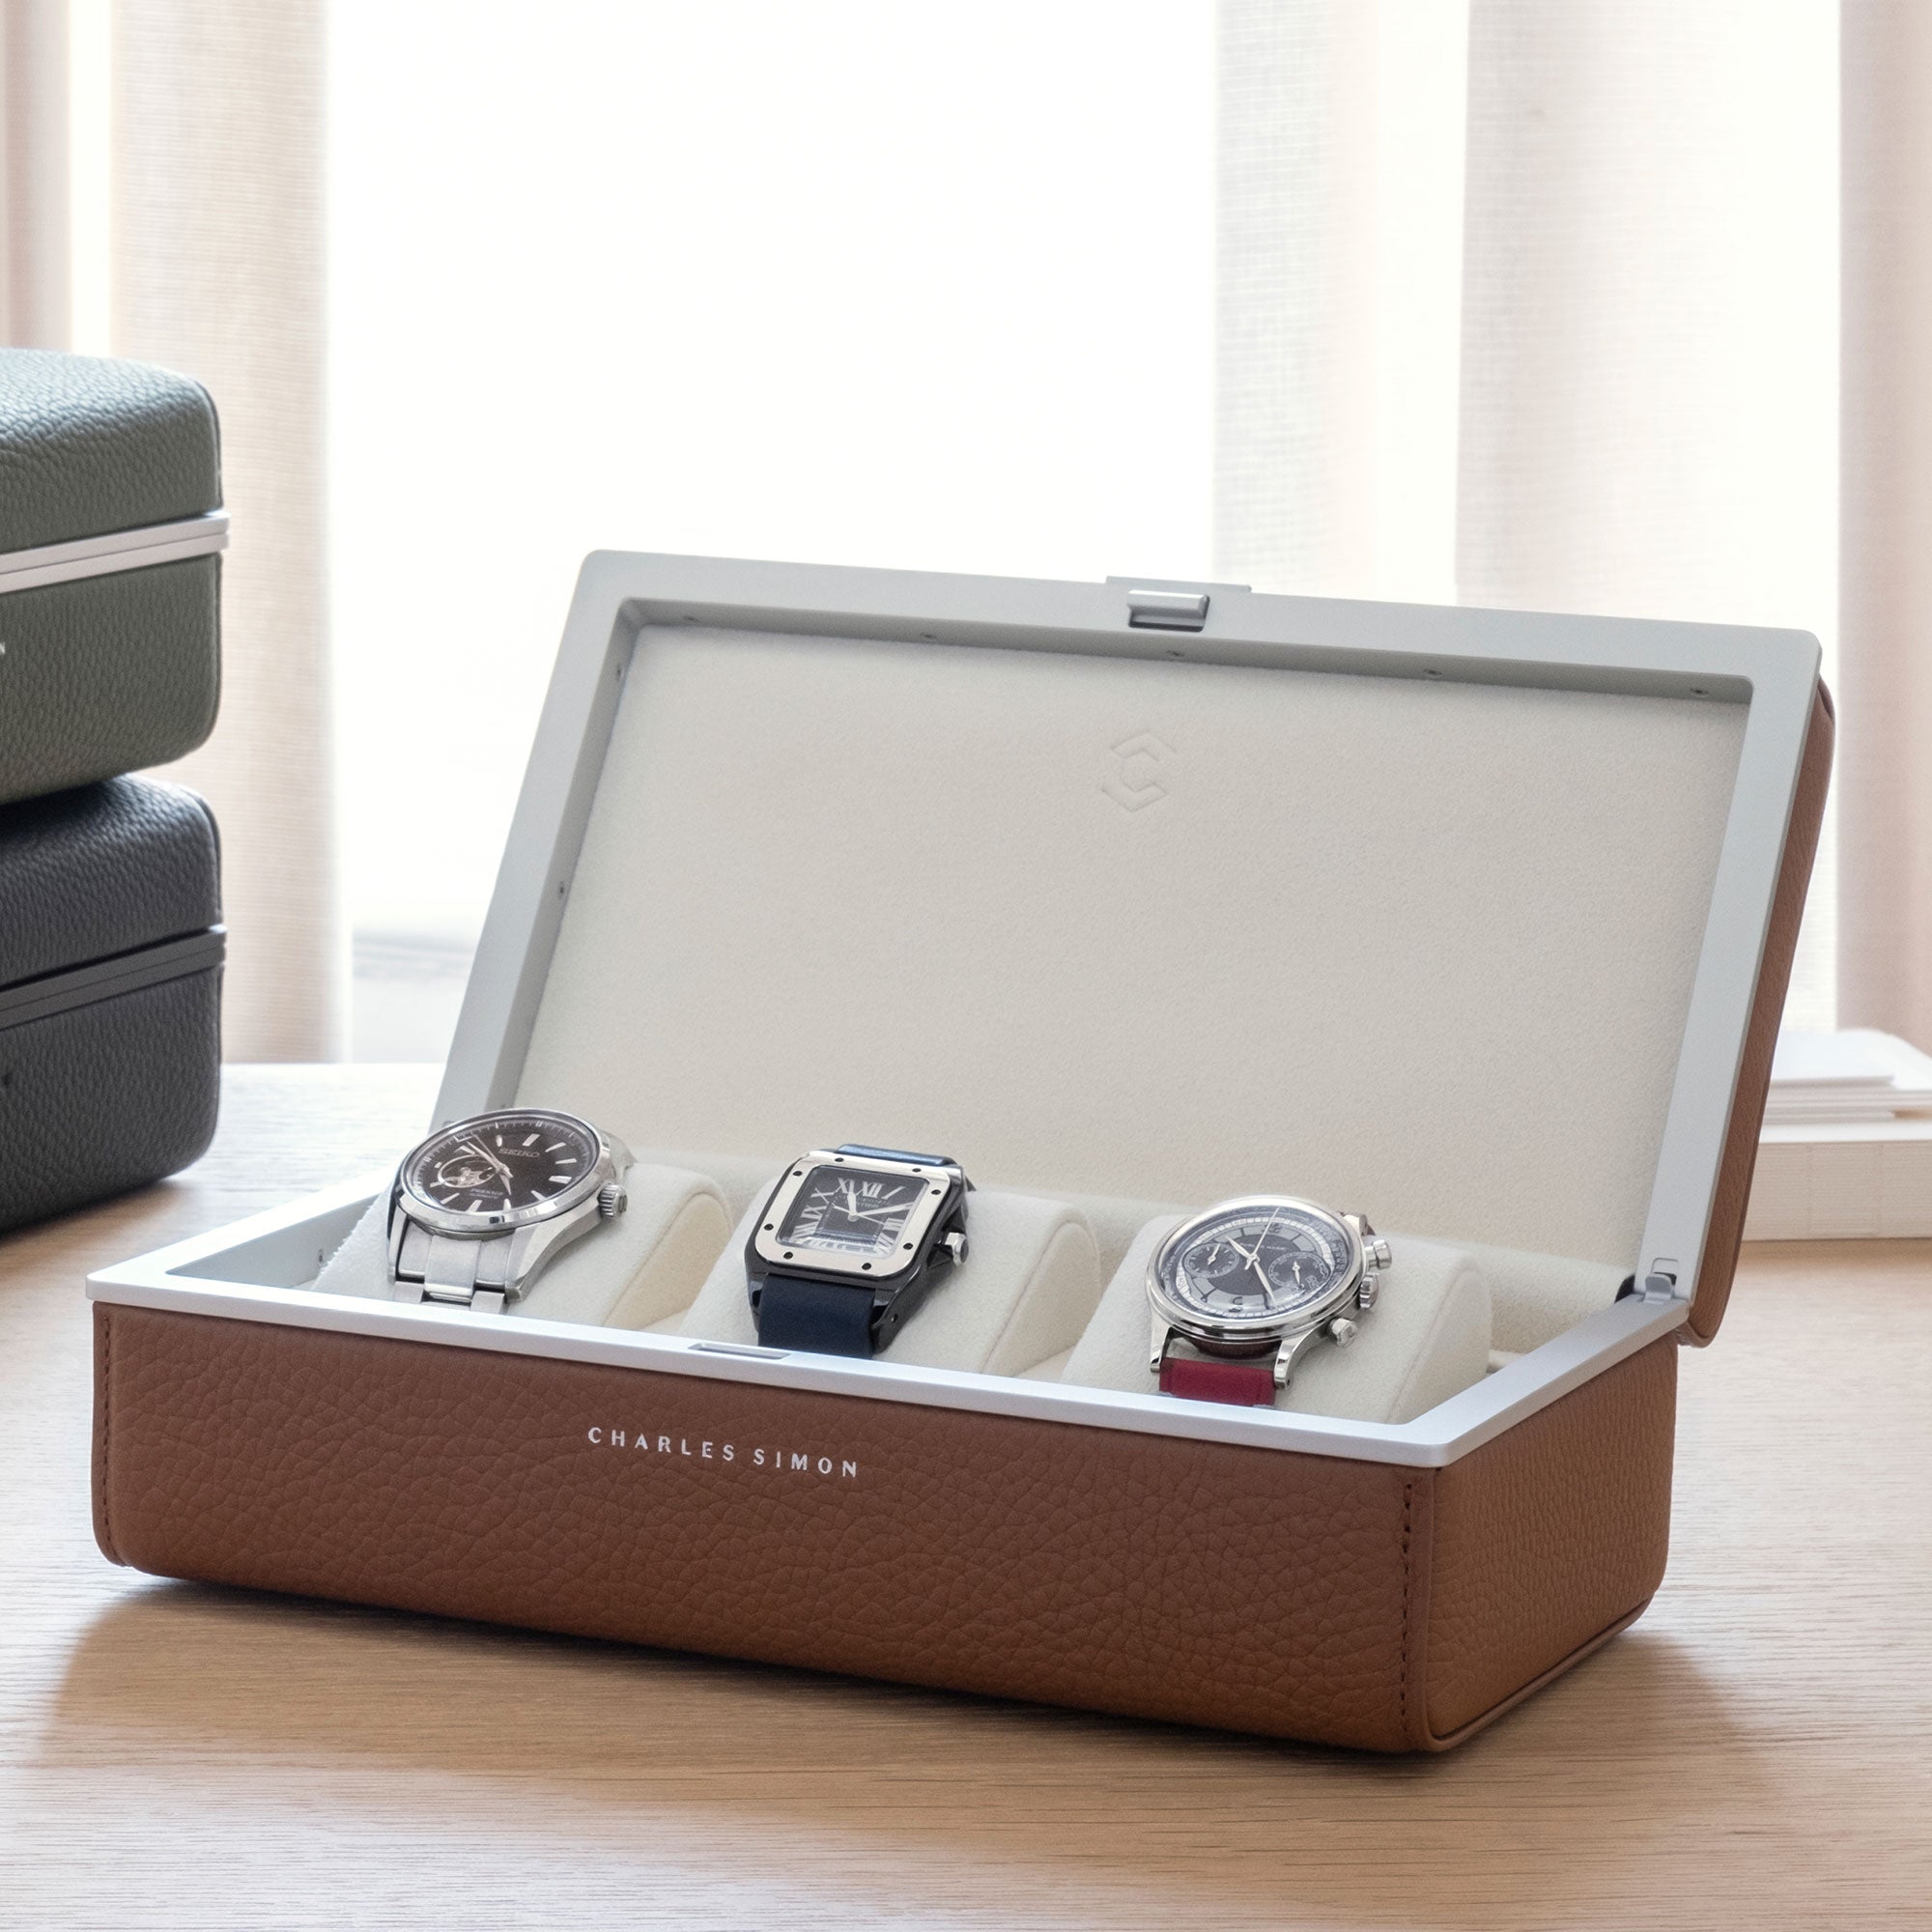 Lifestyle photo of open Eaton 3 Watch case in tan leather and eggshell interior displaying 3 luxury watches